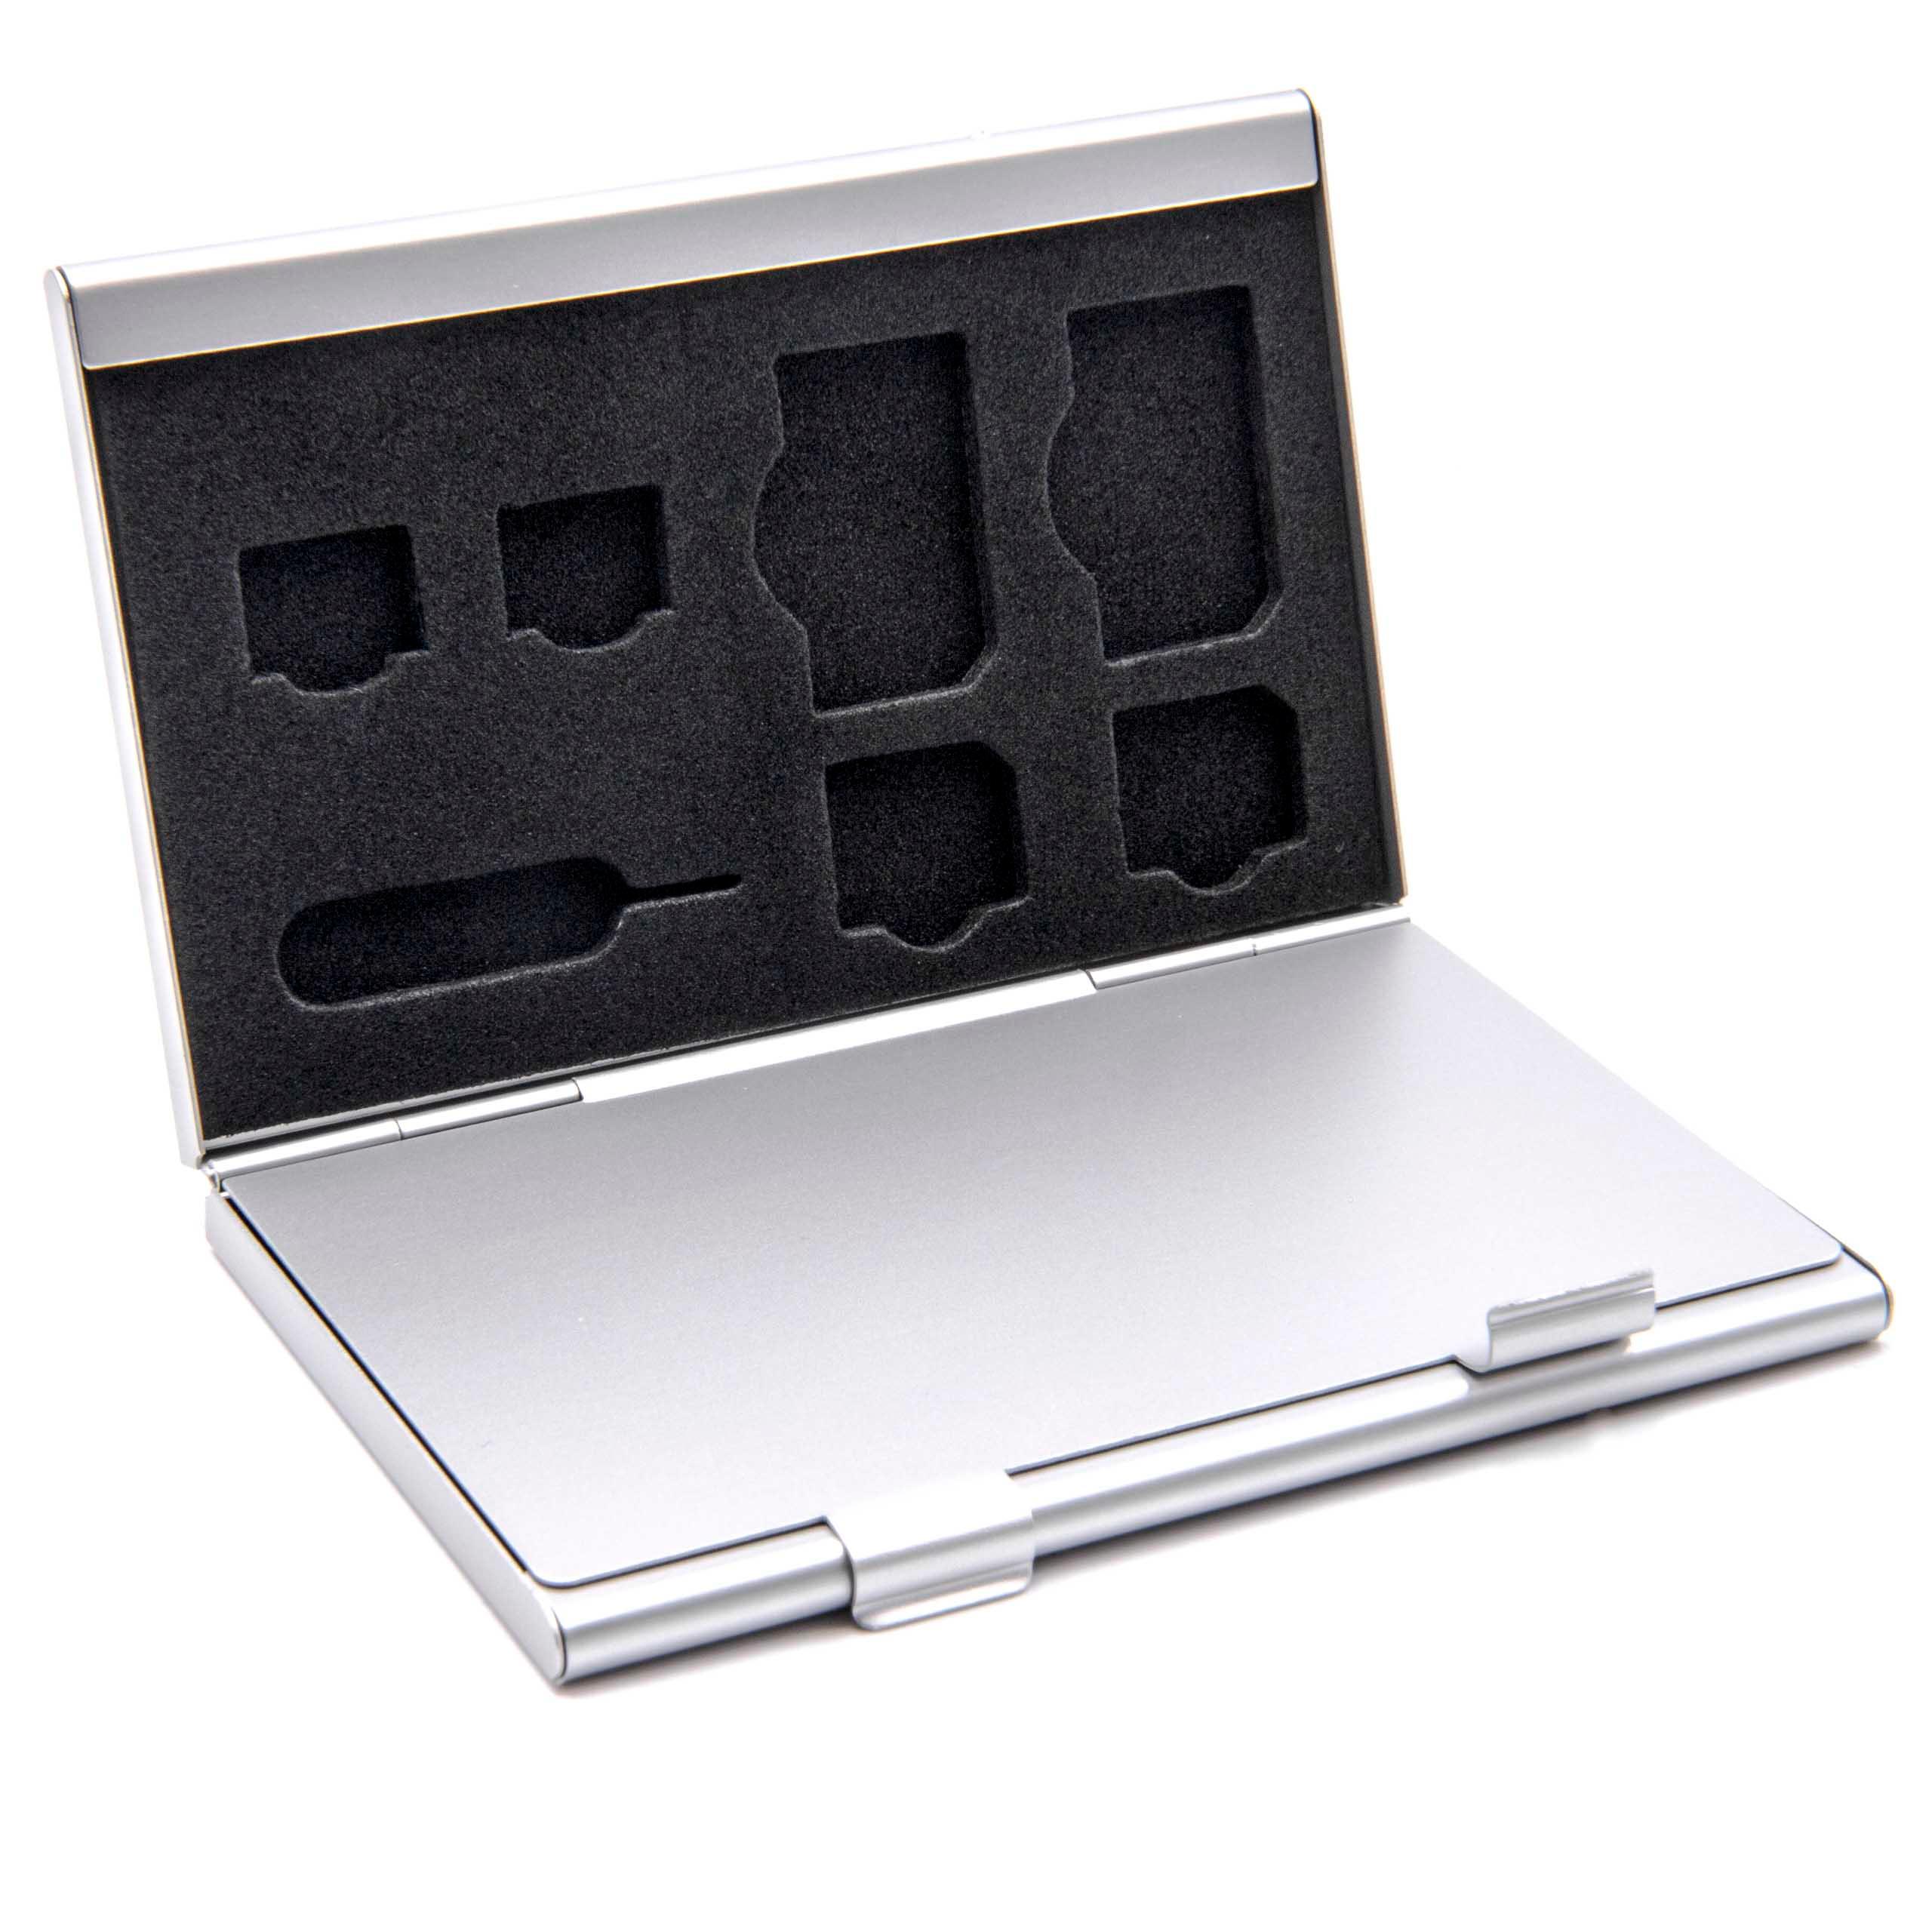 Carrying Case suitable for SIM cards 2x tool to open SIM - aluminium, silver